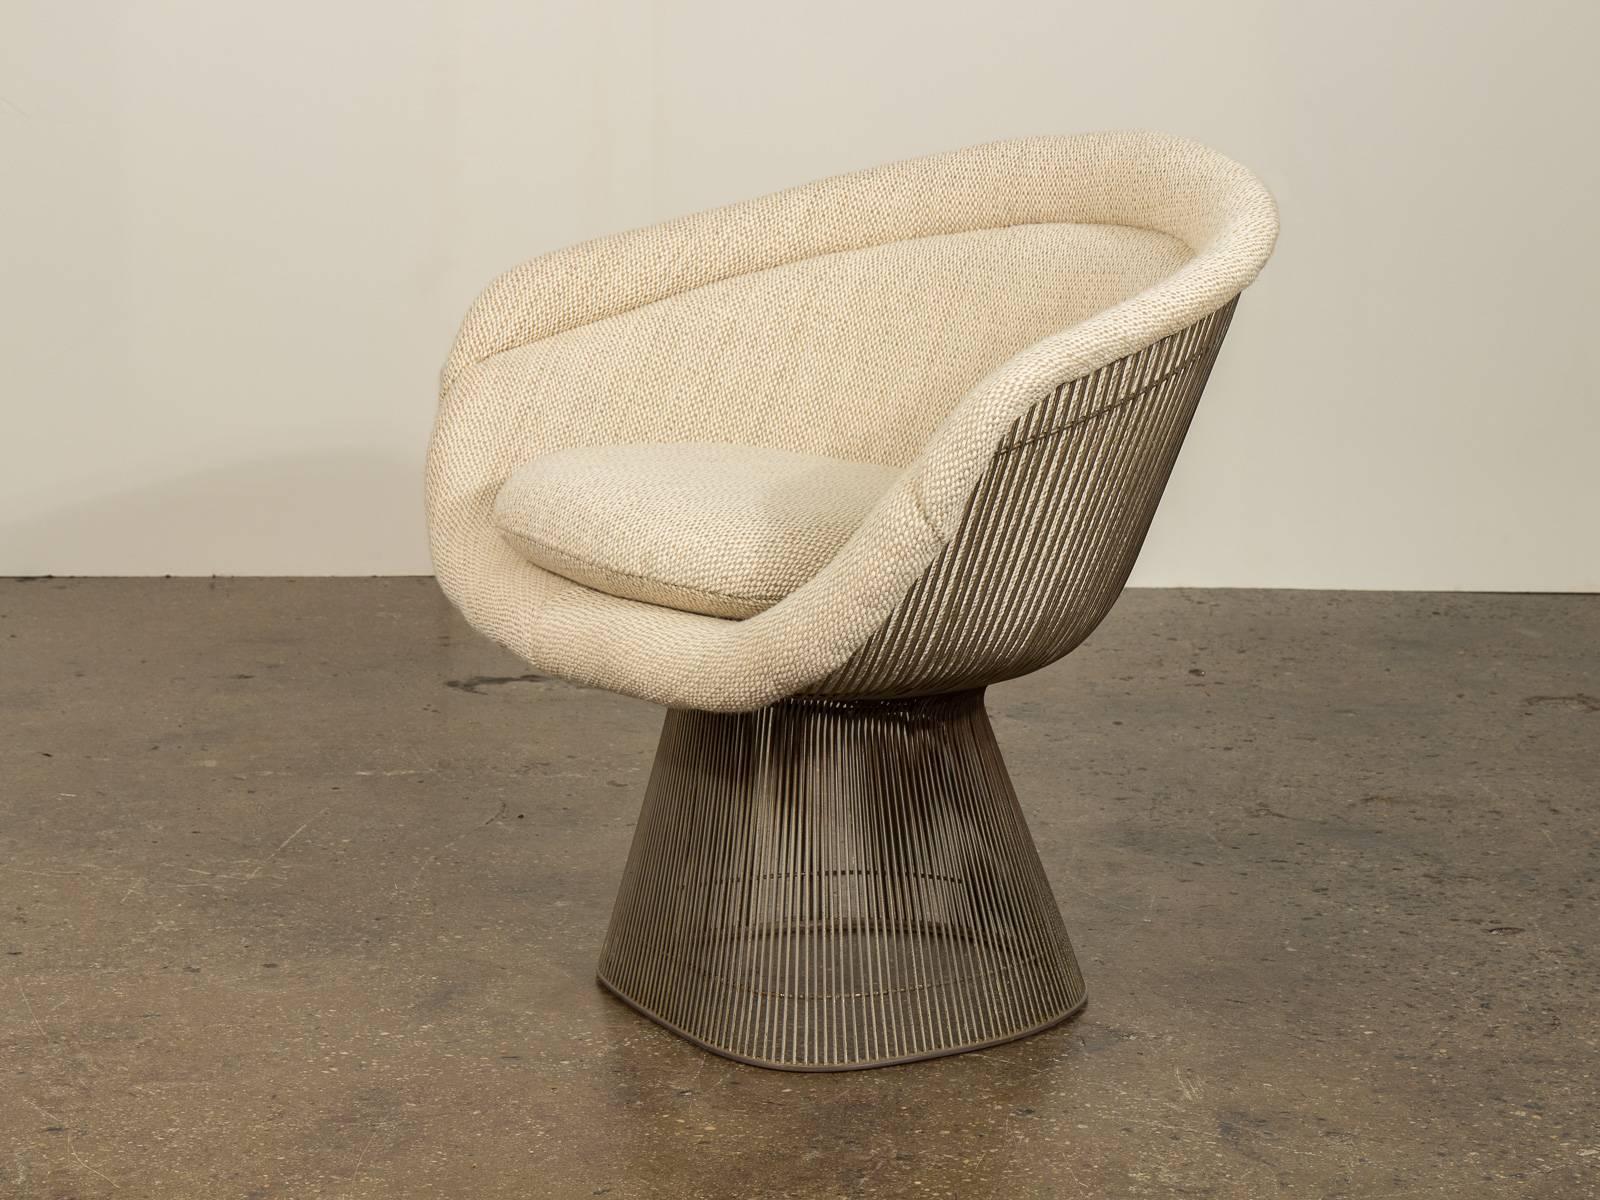 Part of the Platner Collection for Knoll in 1966, Warren Platner's lounge chair combines a soft, inviting seat with an innovative base formed of steel wire rods. Meticulously upholstered in textural cream wool. Matching Platner stool listed